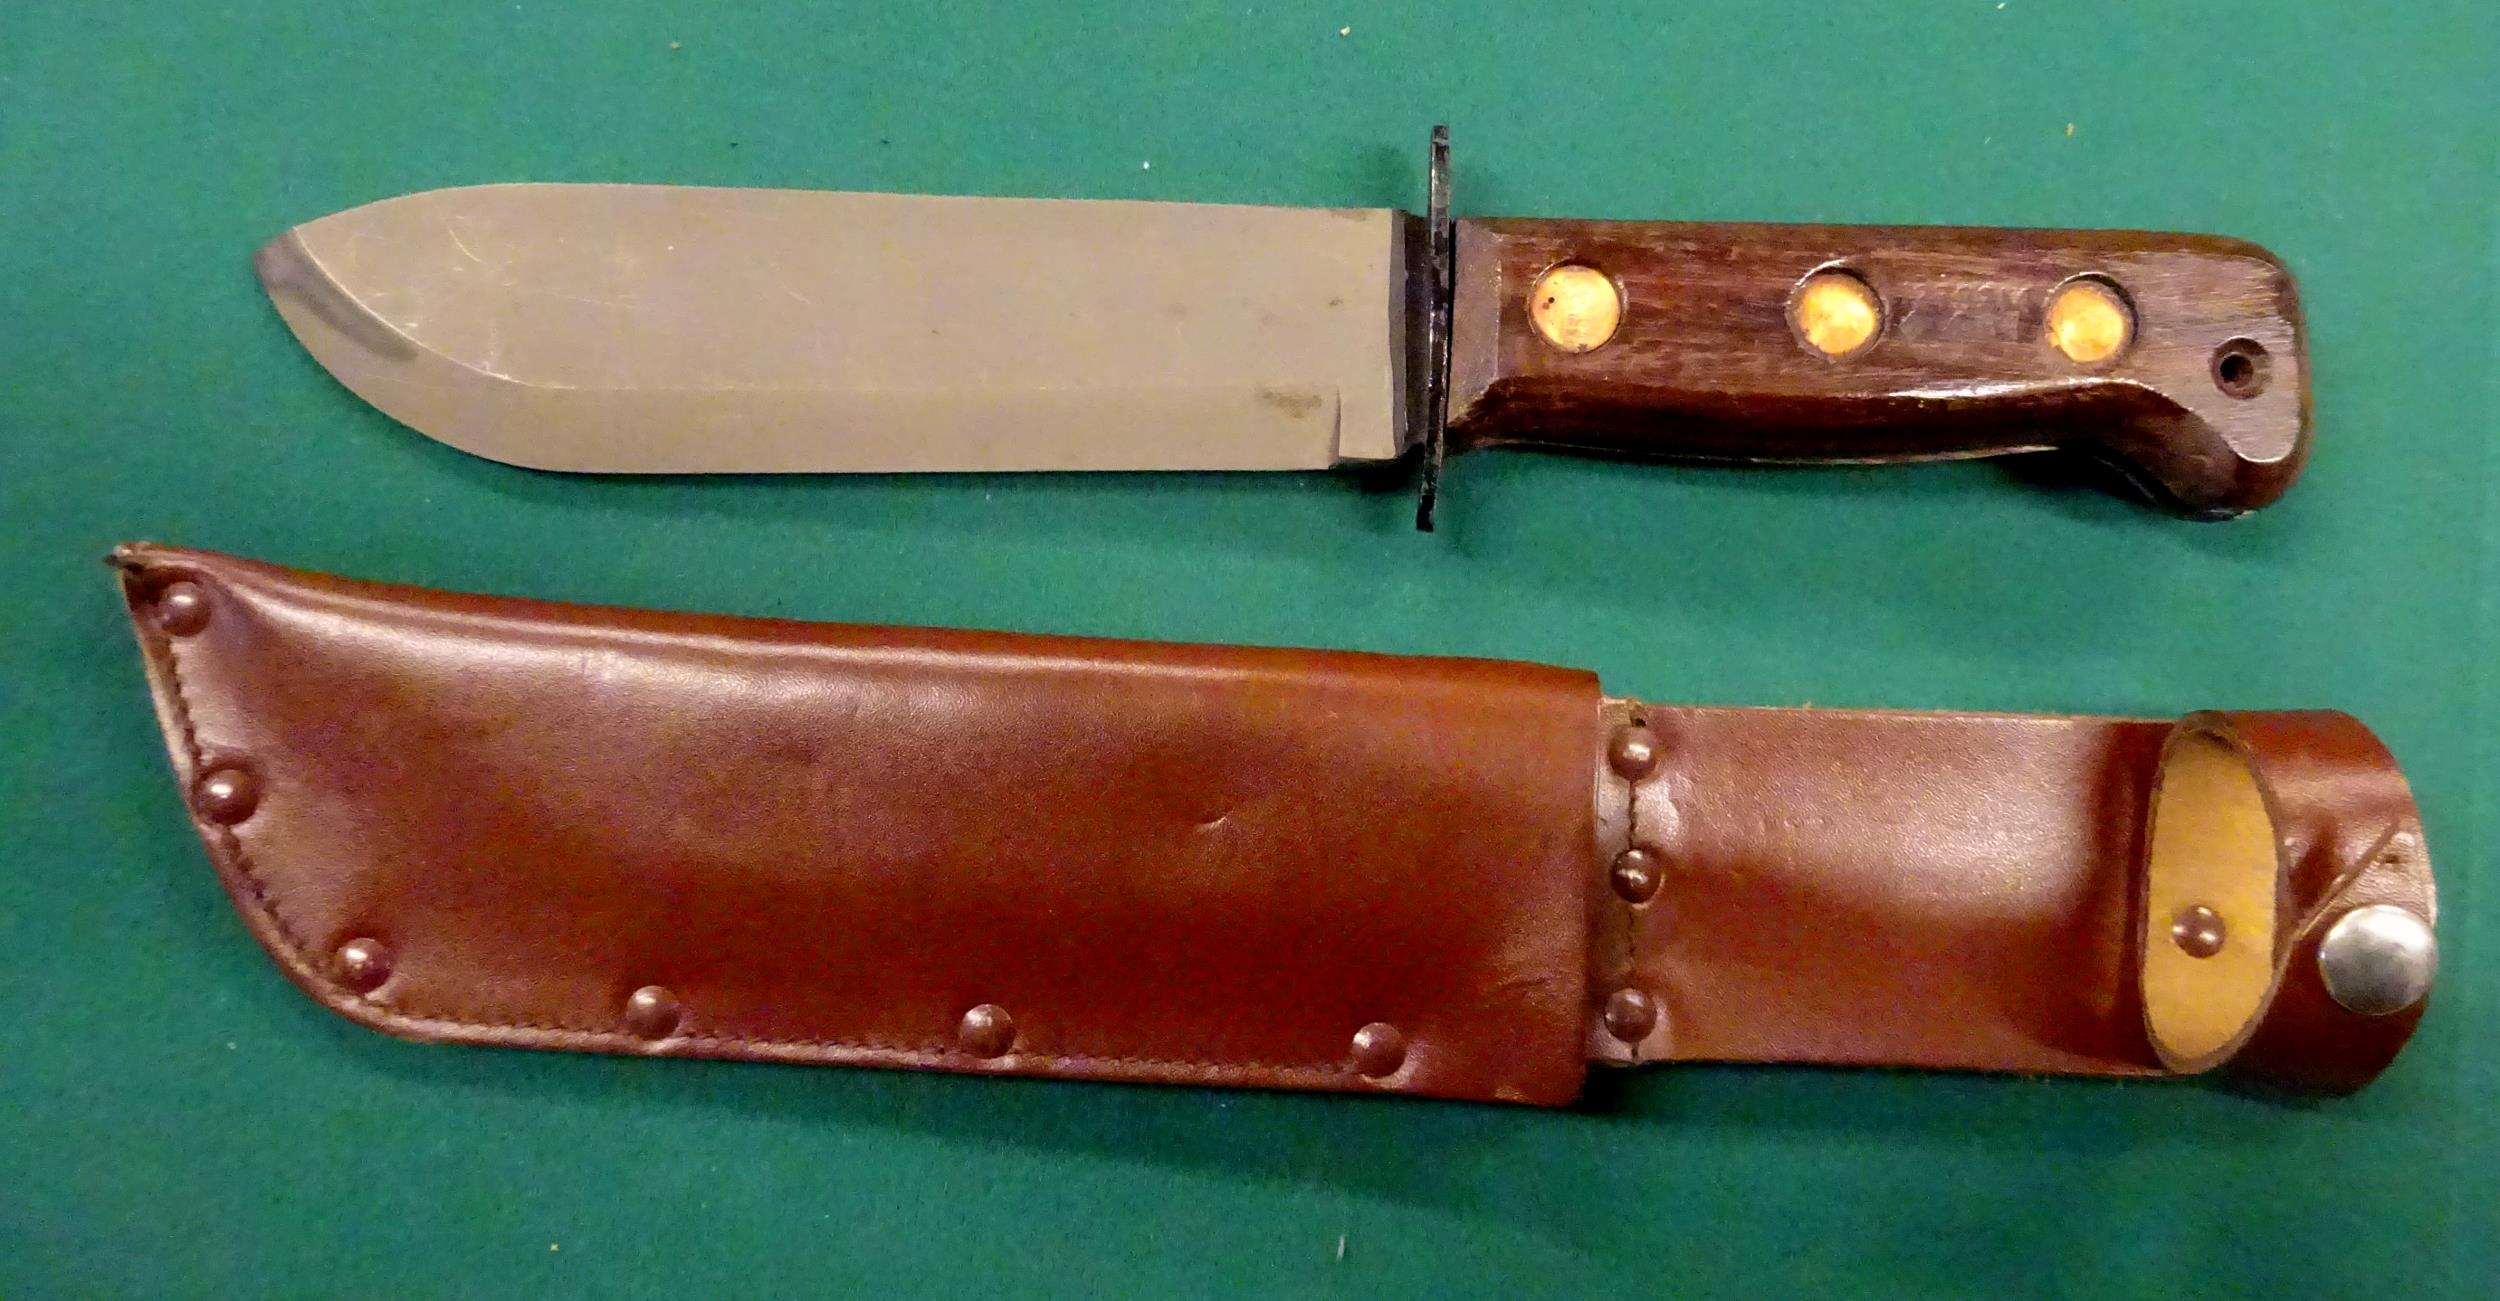 A Wilkinson survival knife c 1970, 2 German combat knives; 2 other Continental survival knives. - Image 3 of 6